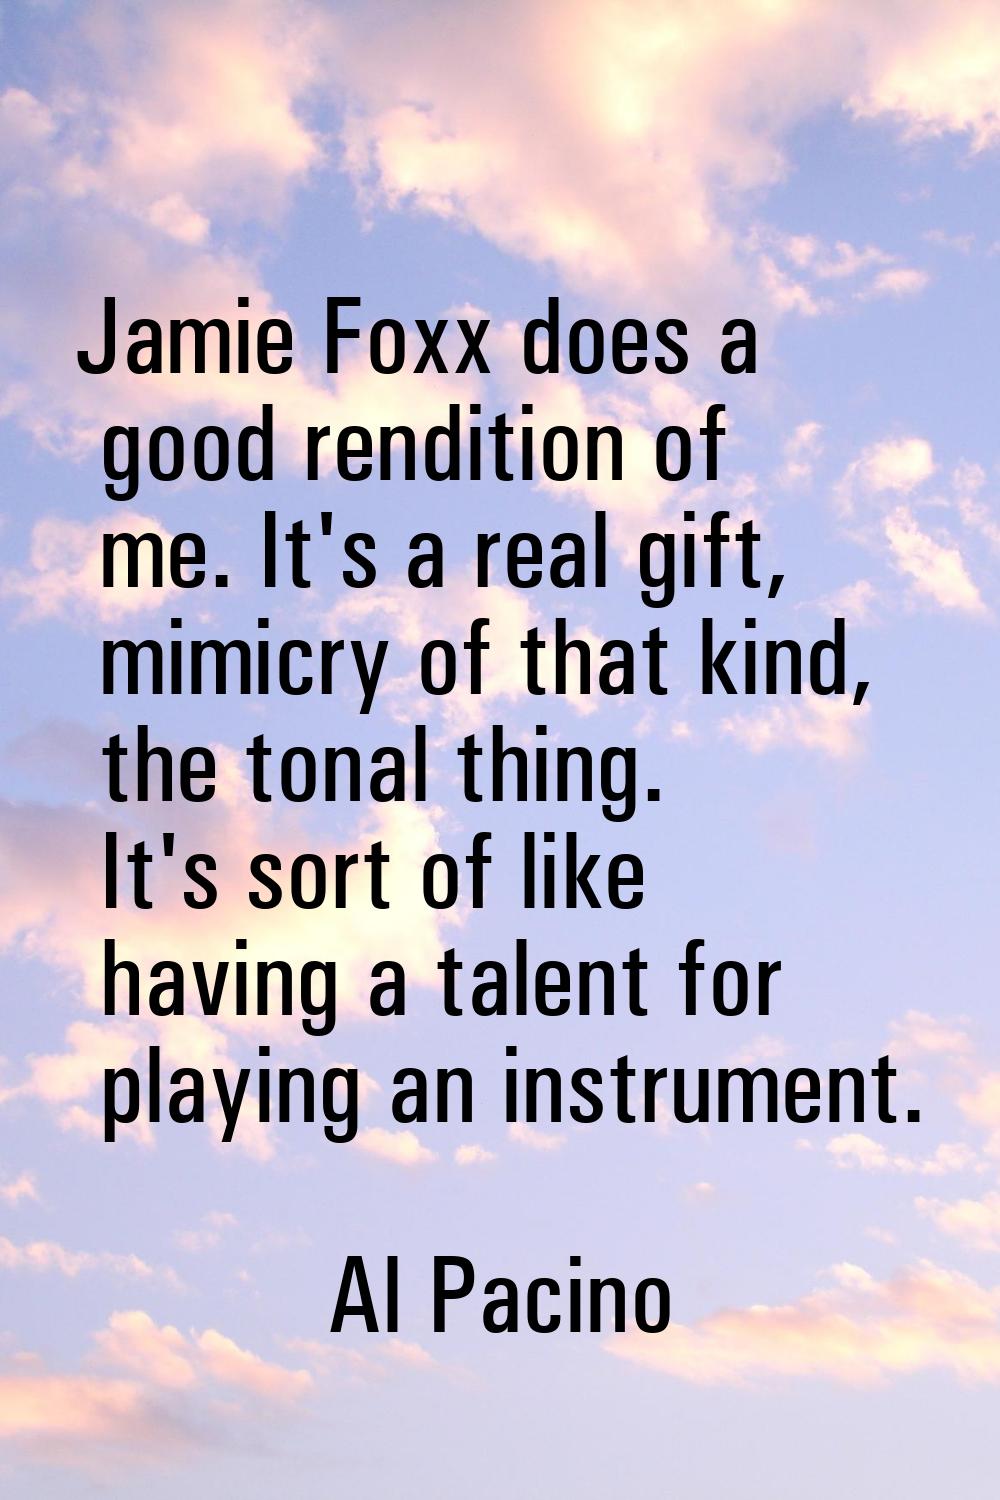 Jamie Foxx does a good rendition of me. It's a real gift, mimicry of that kind, the tonal thing. It